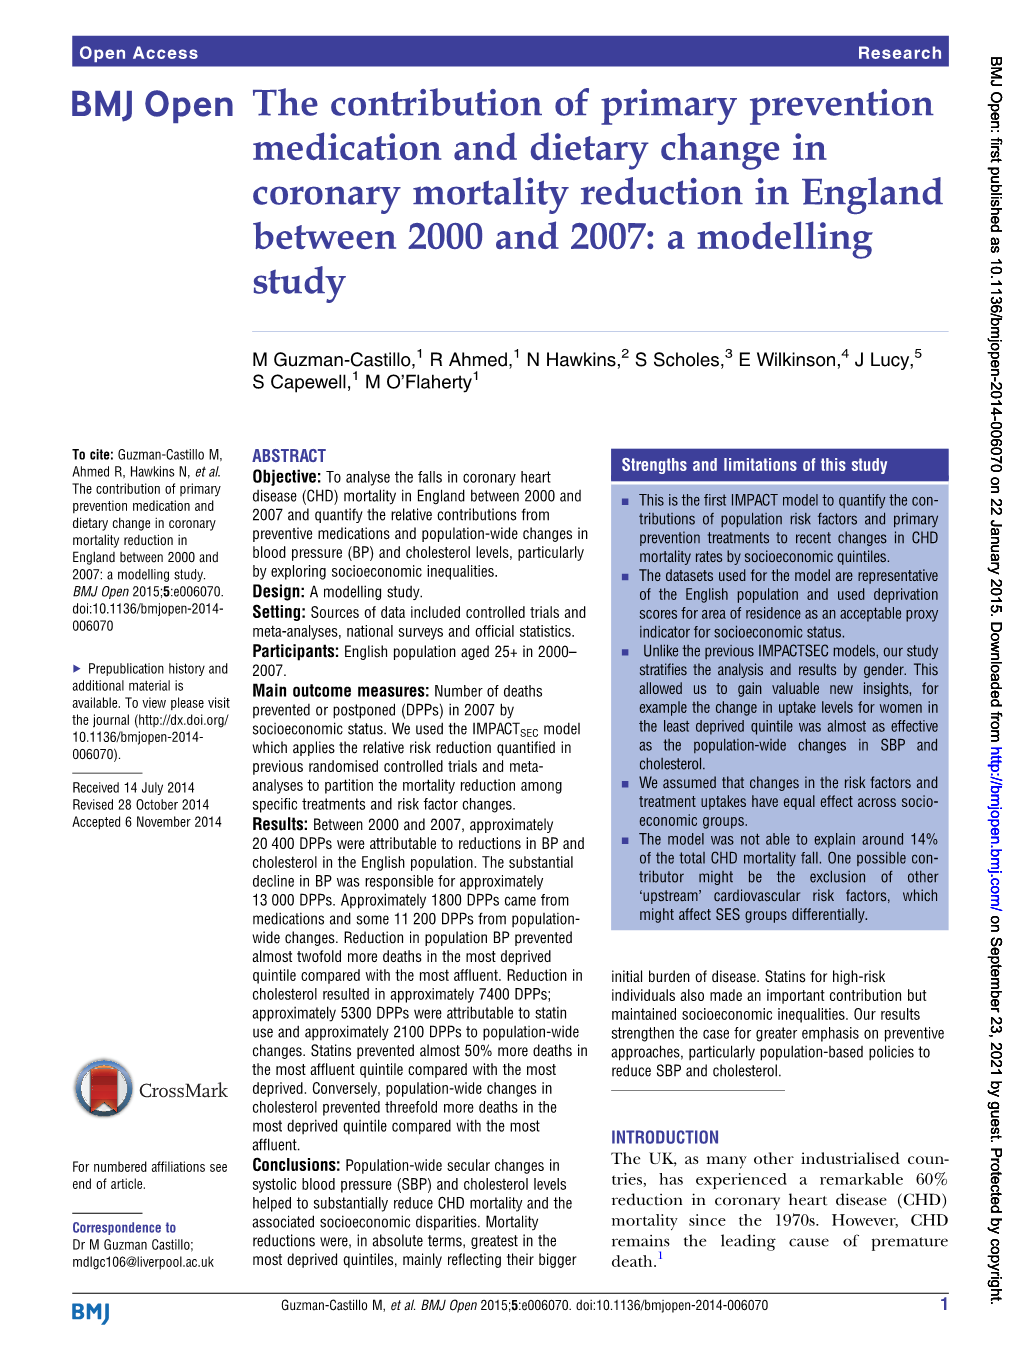 The Contribution of Primary Prevention Medication and Dietary Change in Coronary Mortality Reduction in England Between 2000 and 2007: a Modelling Study